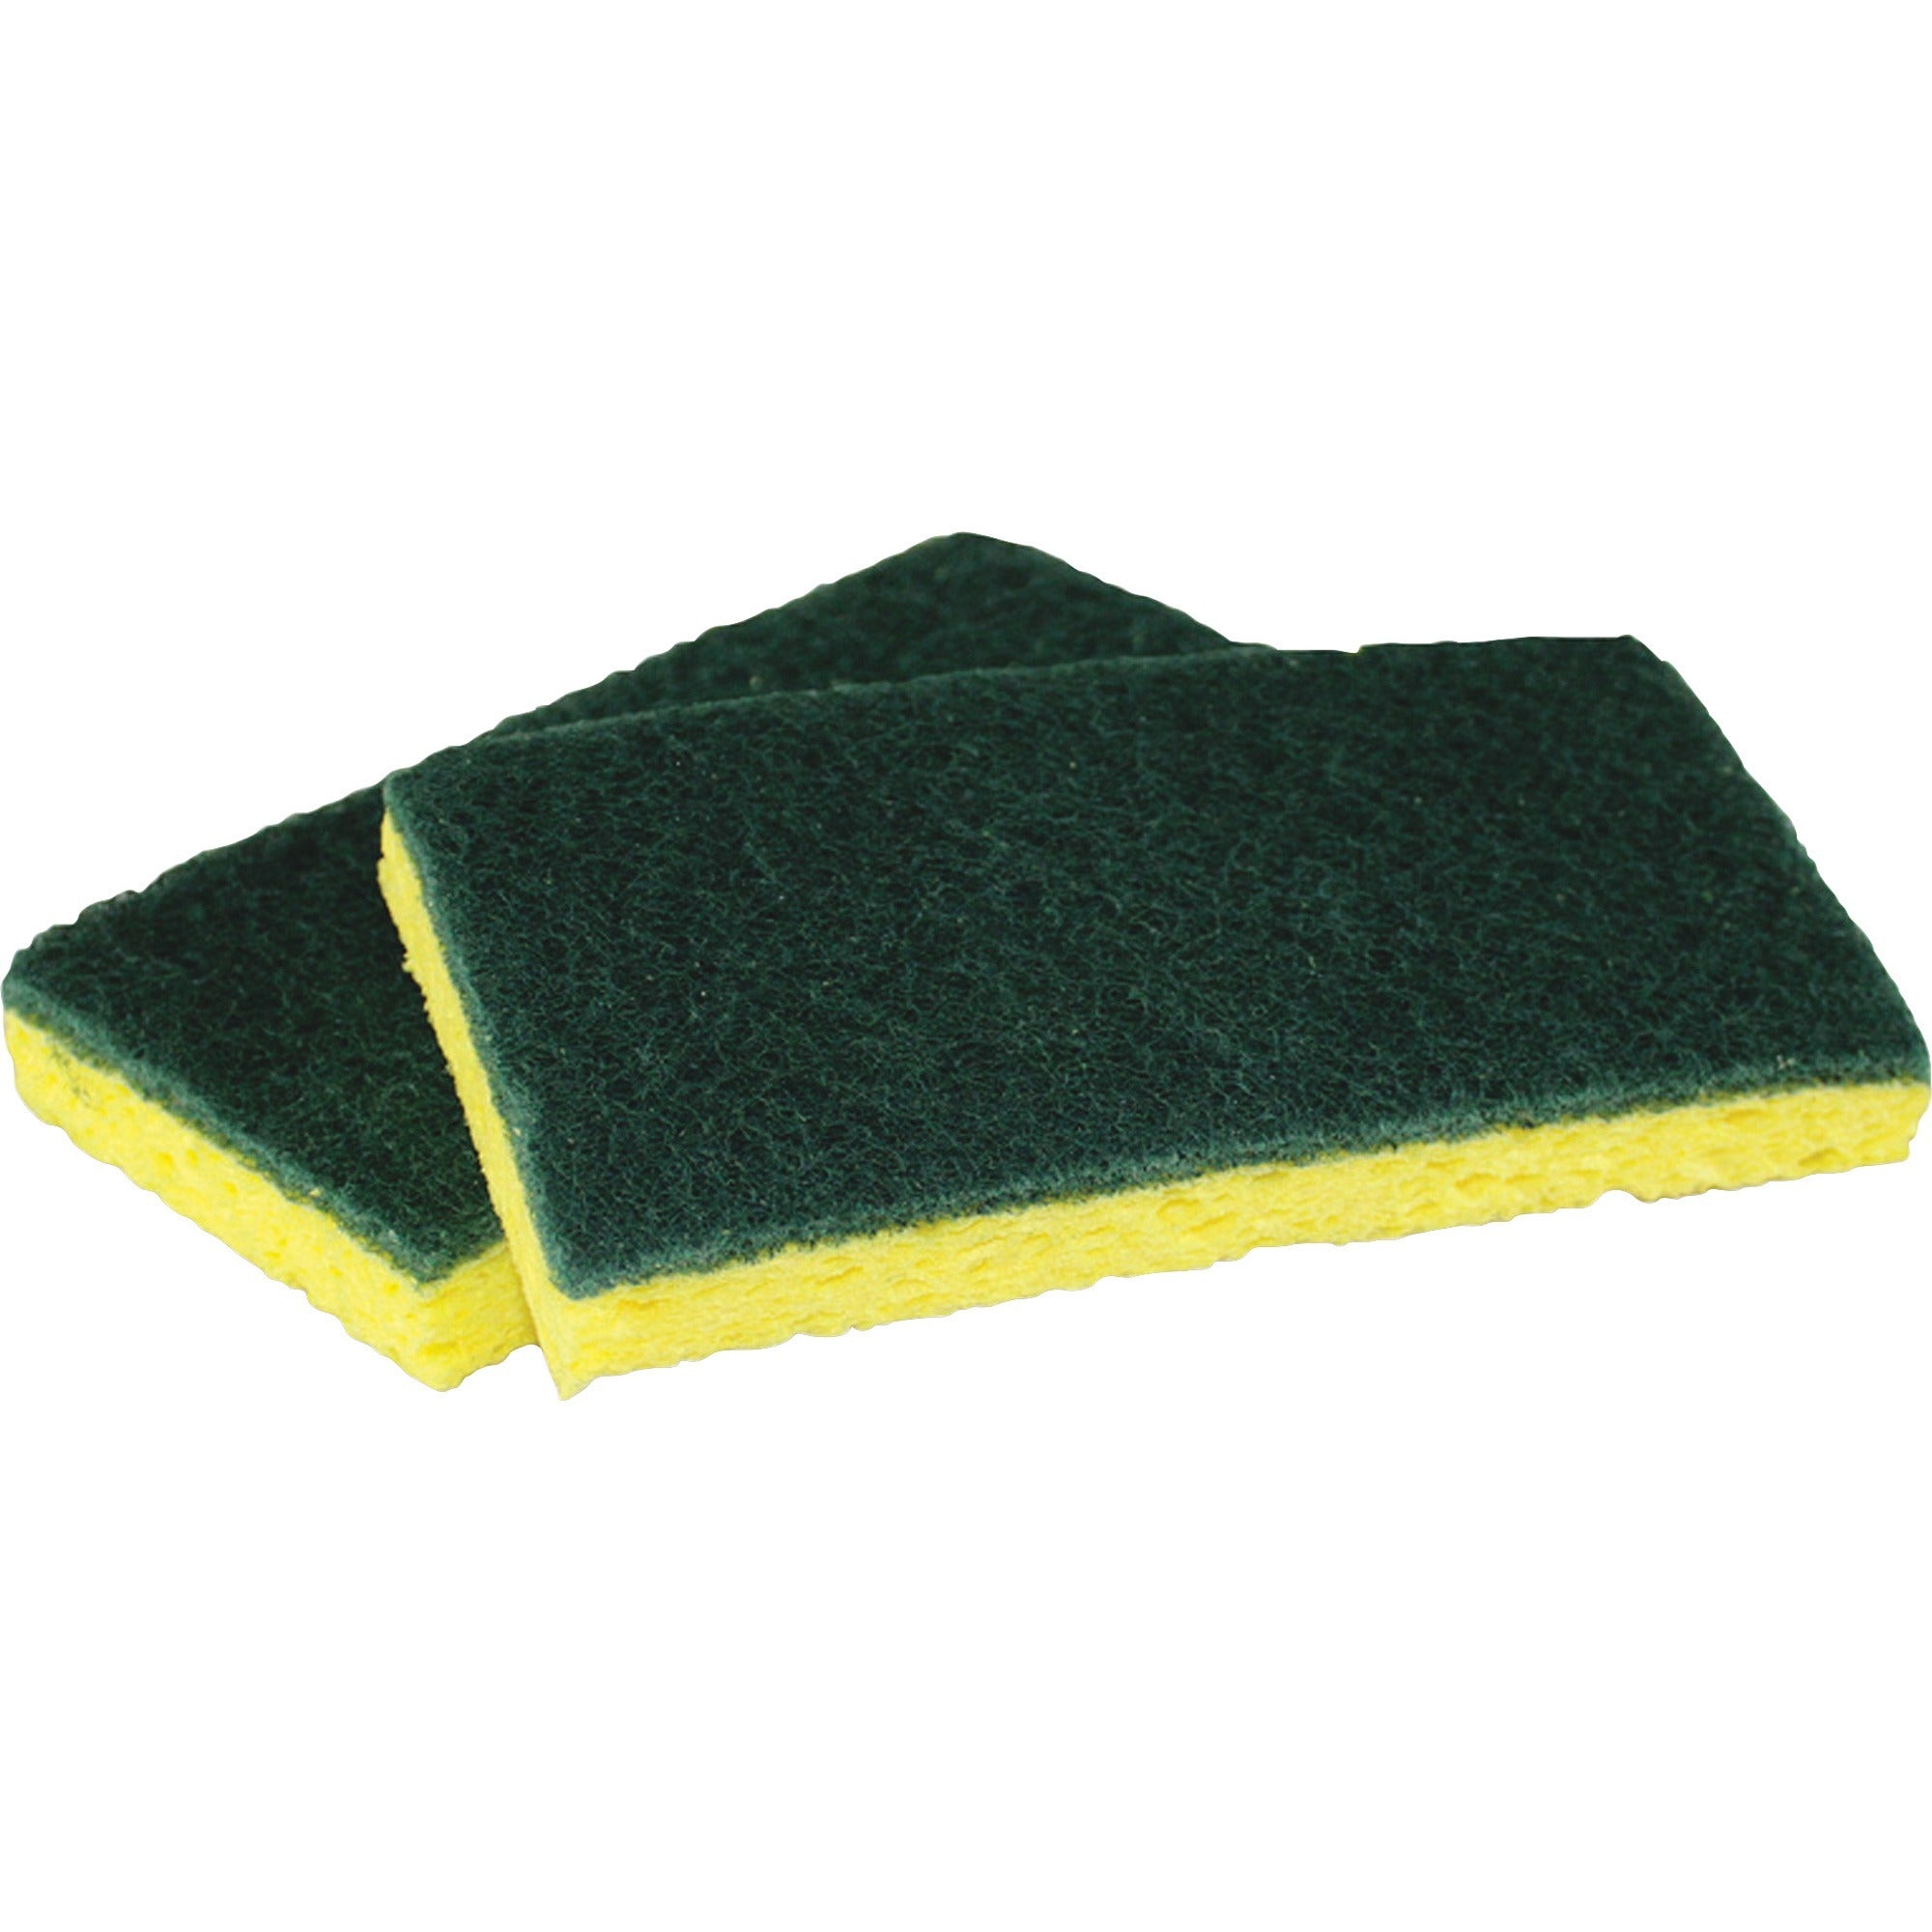 Impact Cellulose Scrubber Sponge - 0.9" Height x 3.2" Width x 6.3" Length - 5/Pack - Cellulose - Yellow, Green - 